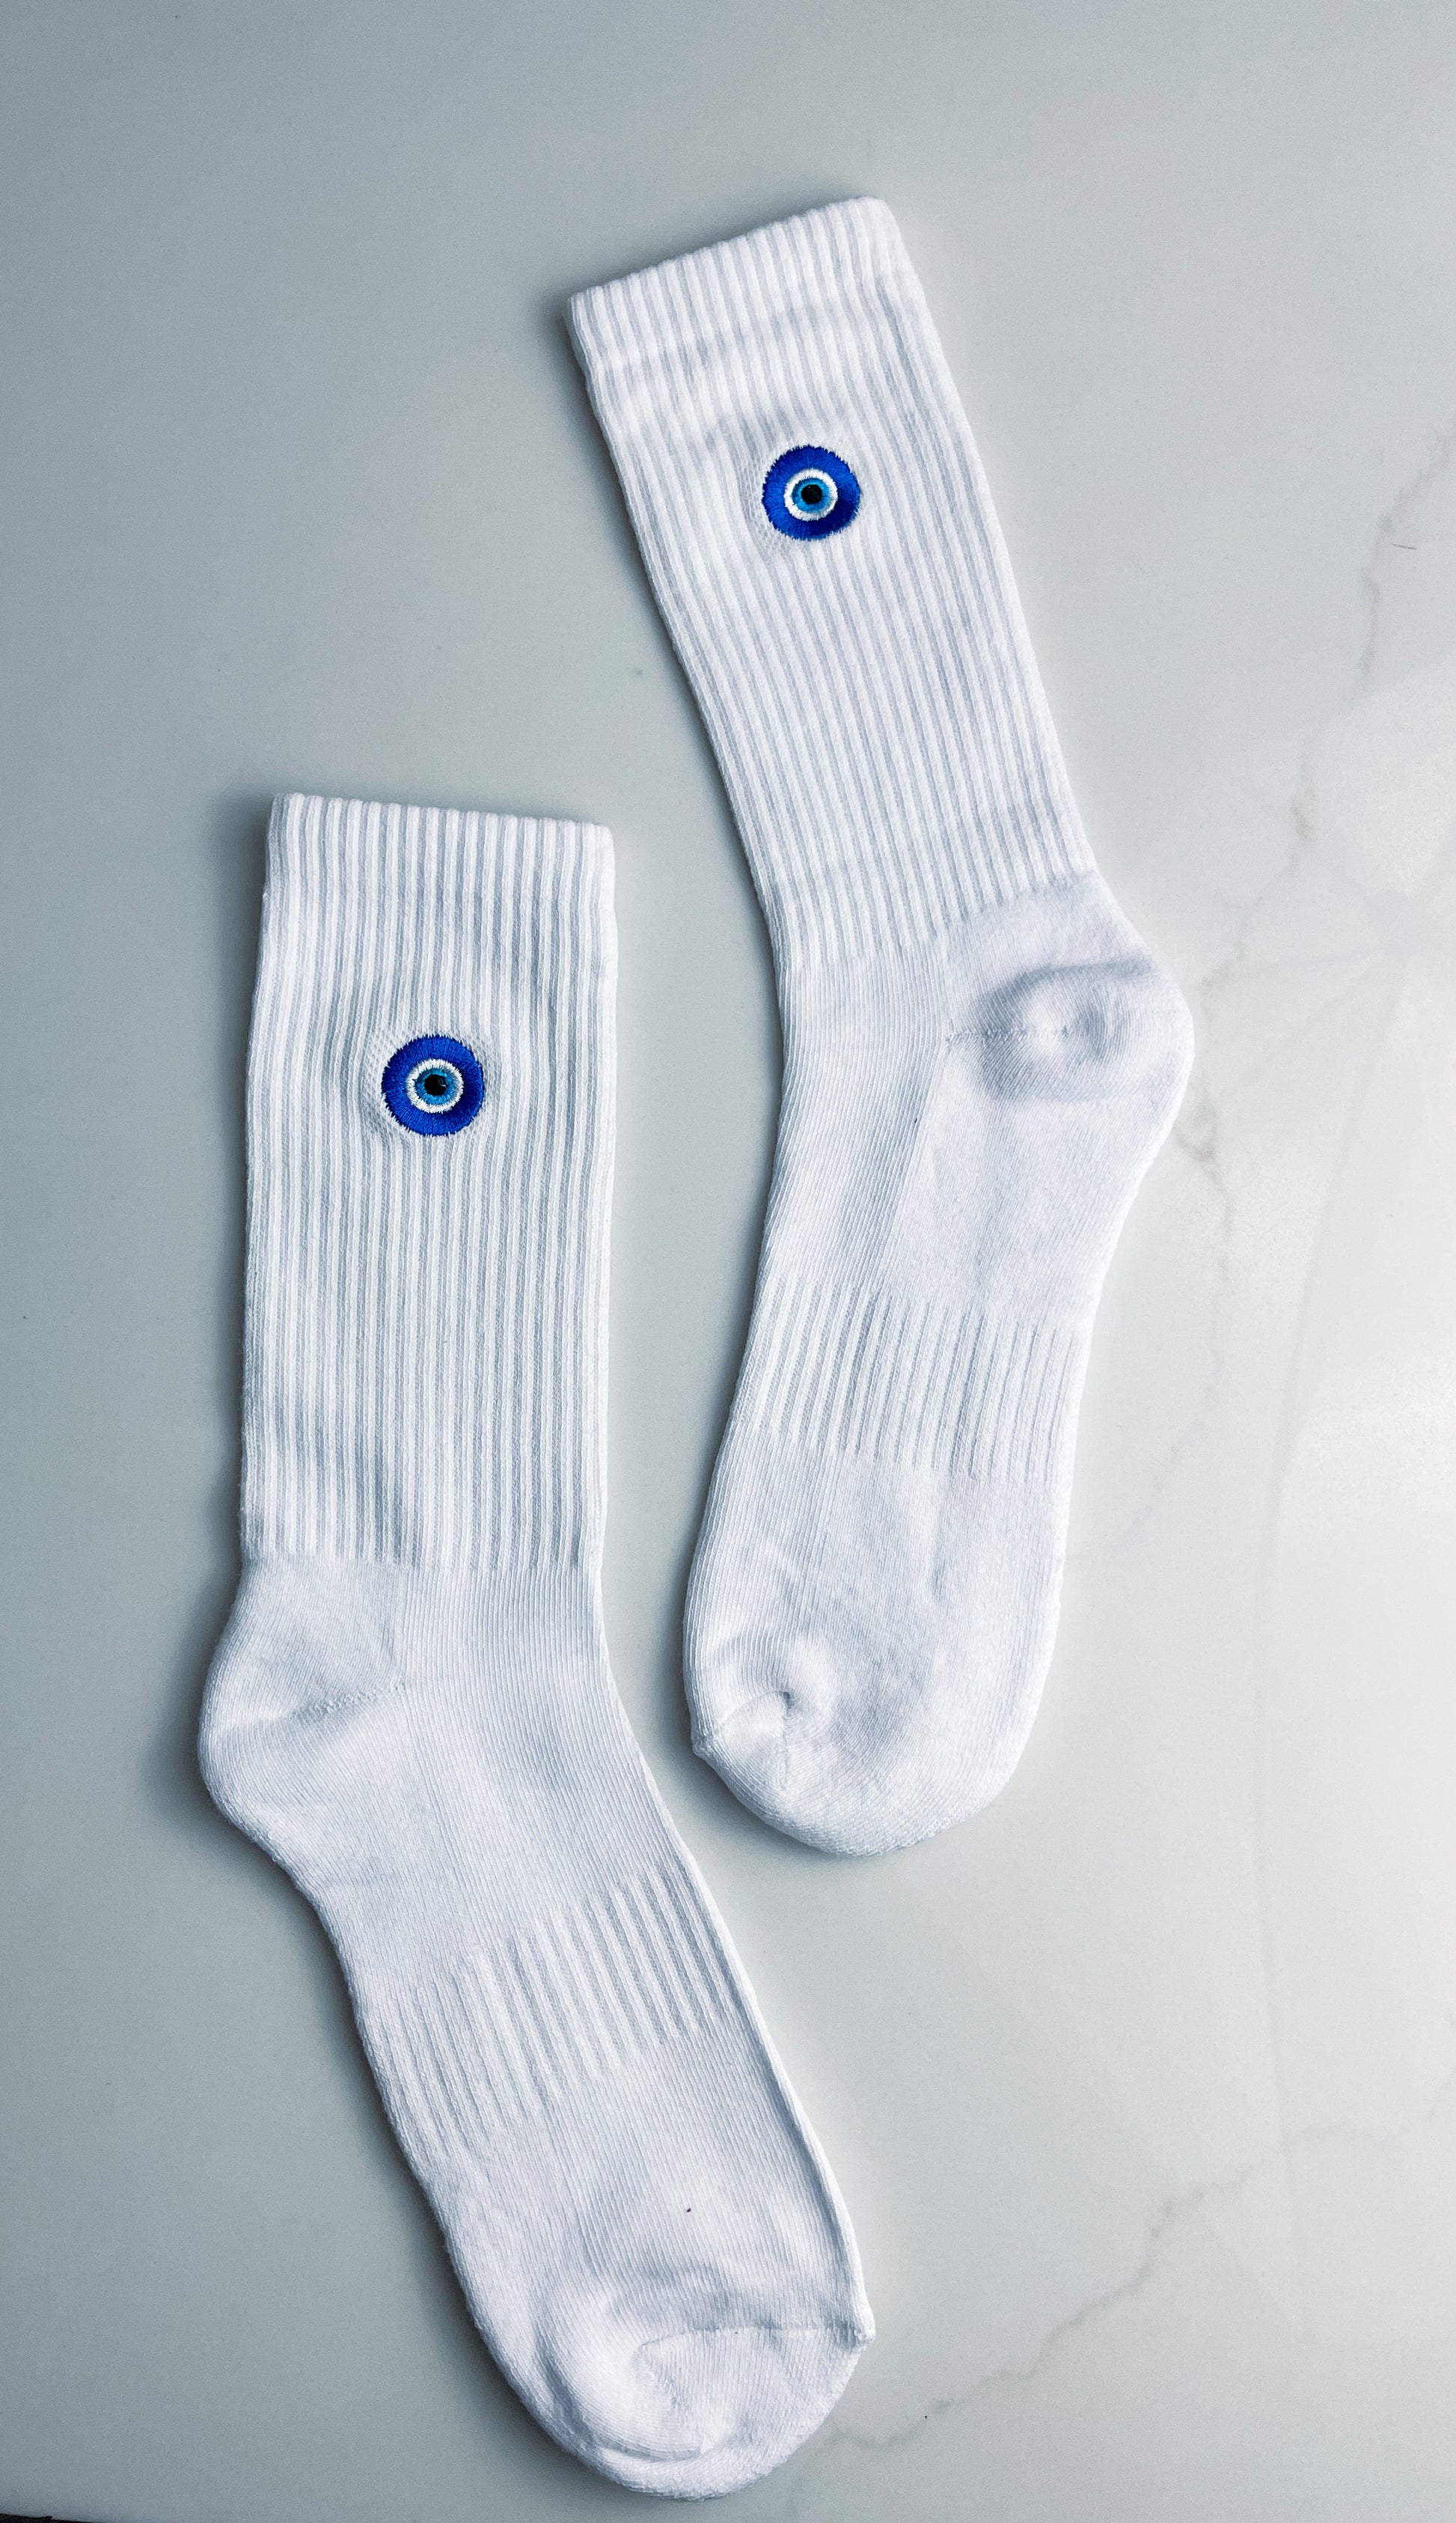 Good Fortune arch band crew sock White with Navy – Modern Envy Apparel